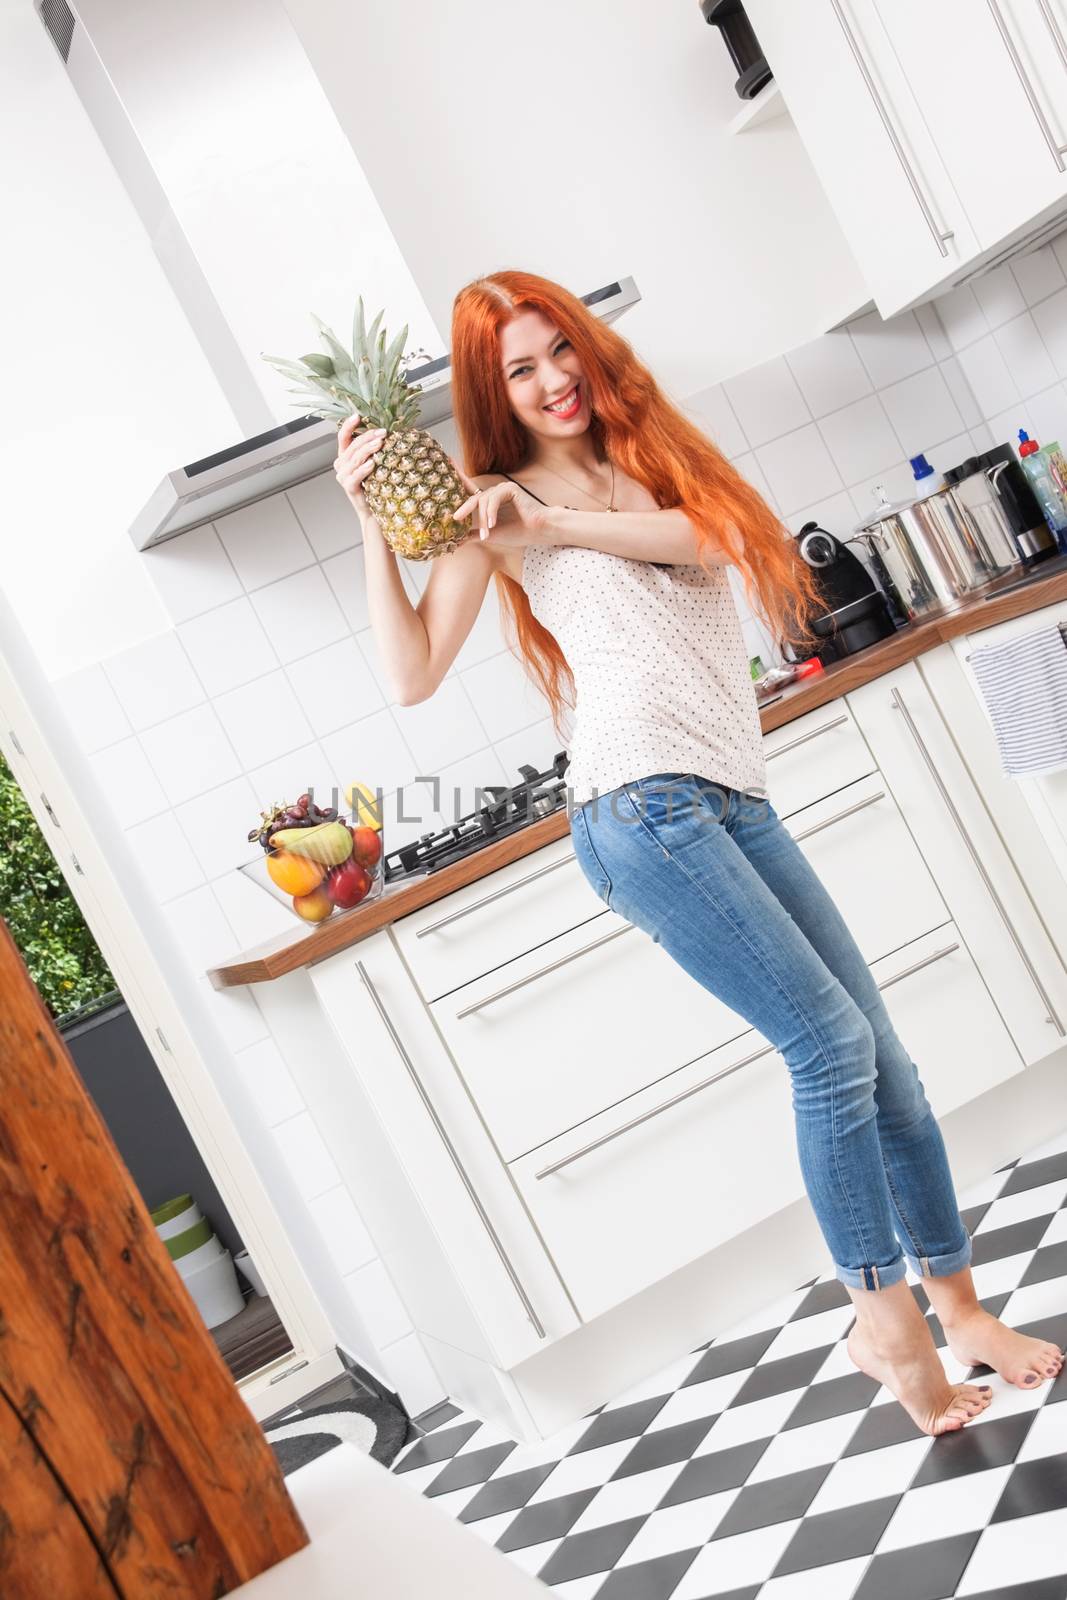 Happy Young Woman Using a Pineapple Fruit as Microphone While Singing Out Loud In the Kitchen.